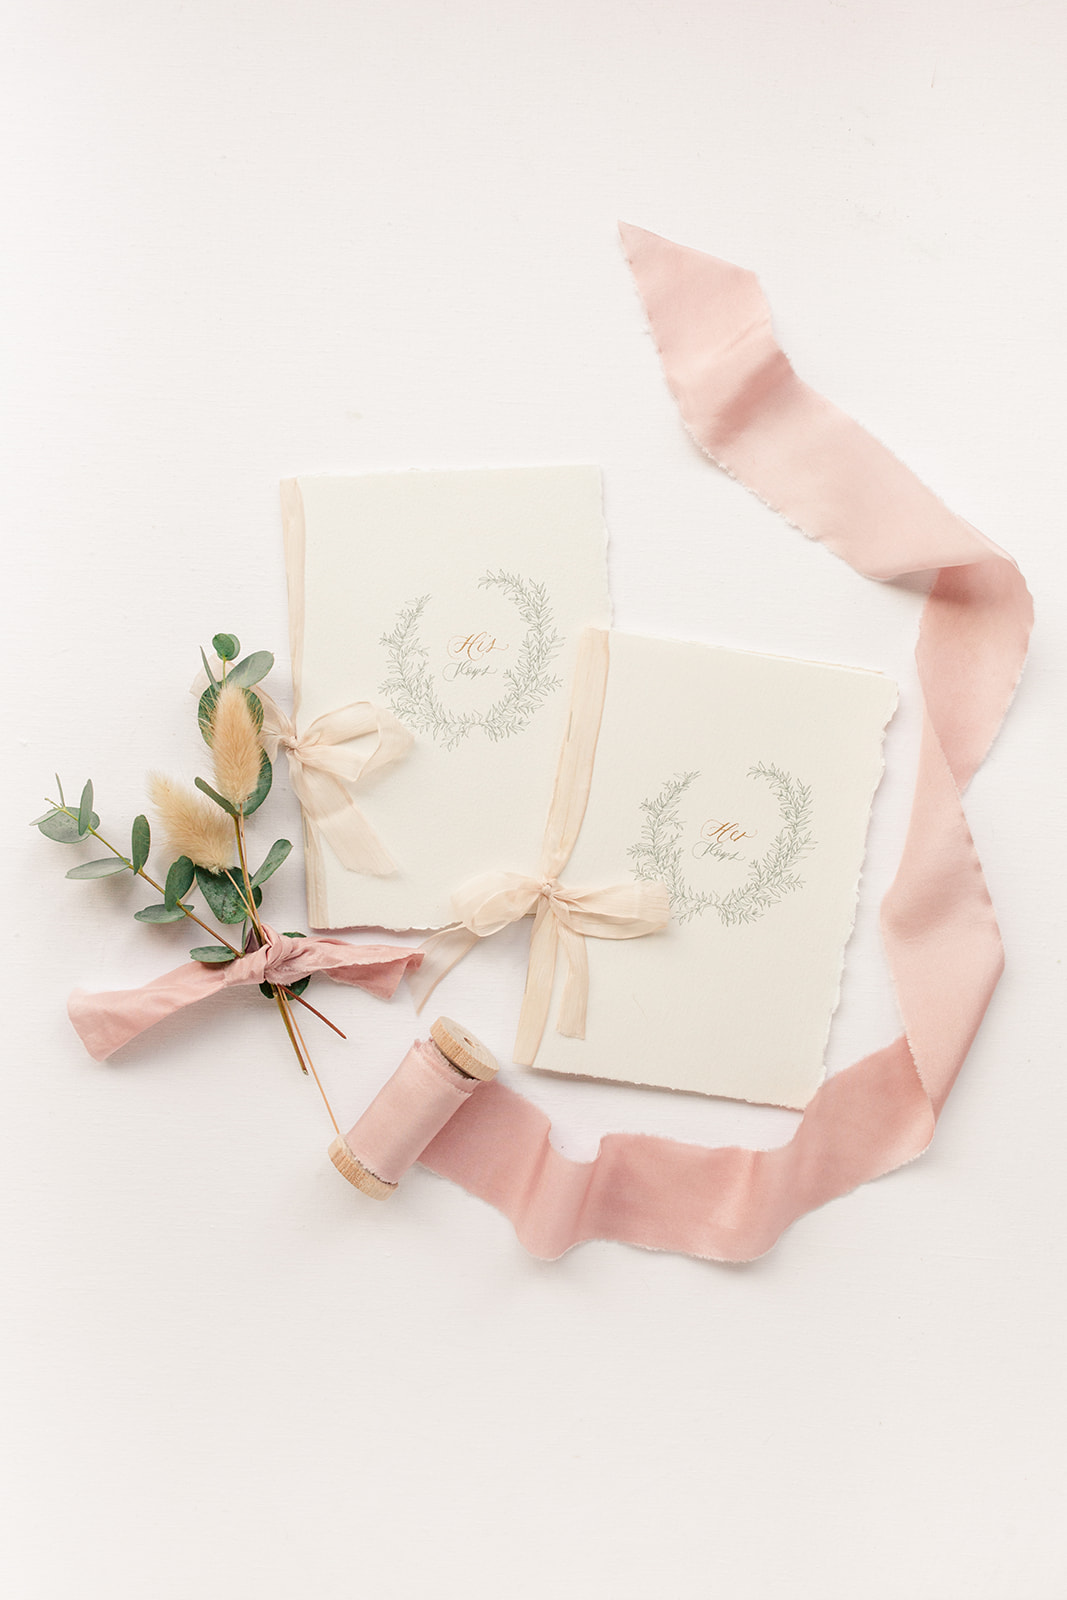 Romantic pink and white wedding vowbooks for eloping couples